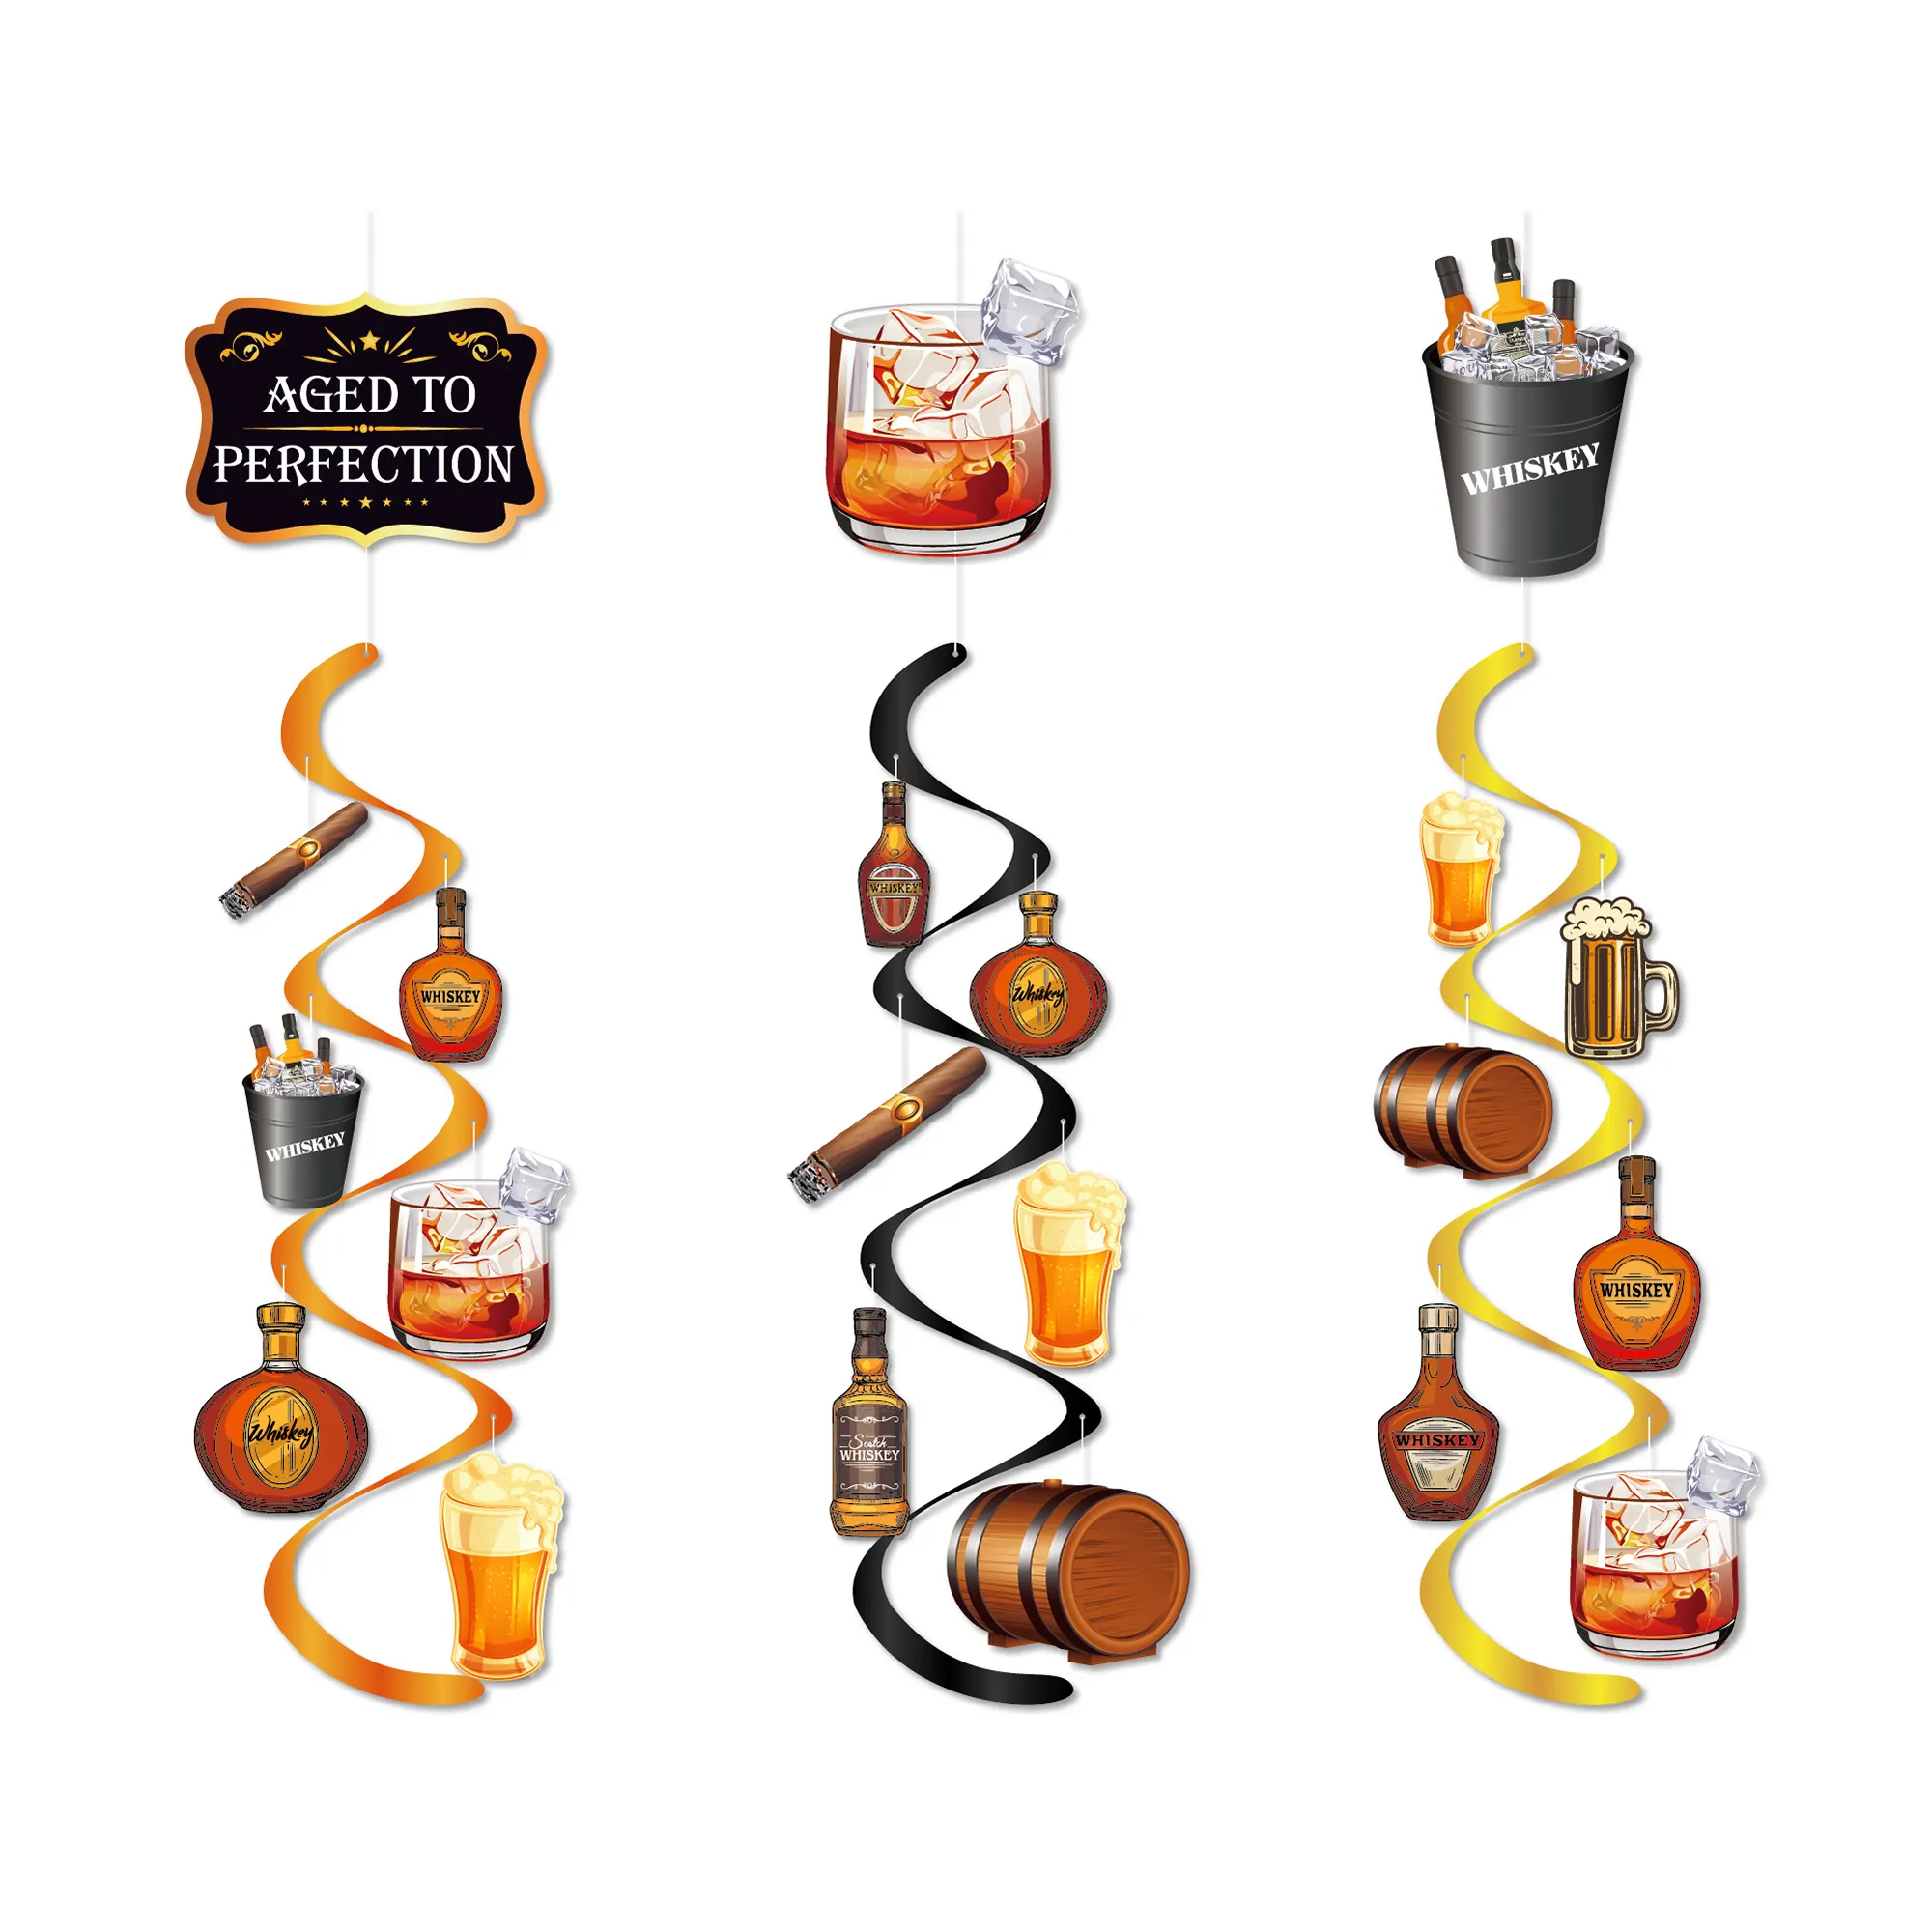 Huancai whiskey beer hanging decorations wind chime foil swirls ceiling spirals for birthday aged to perfection party supplies